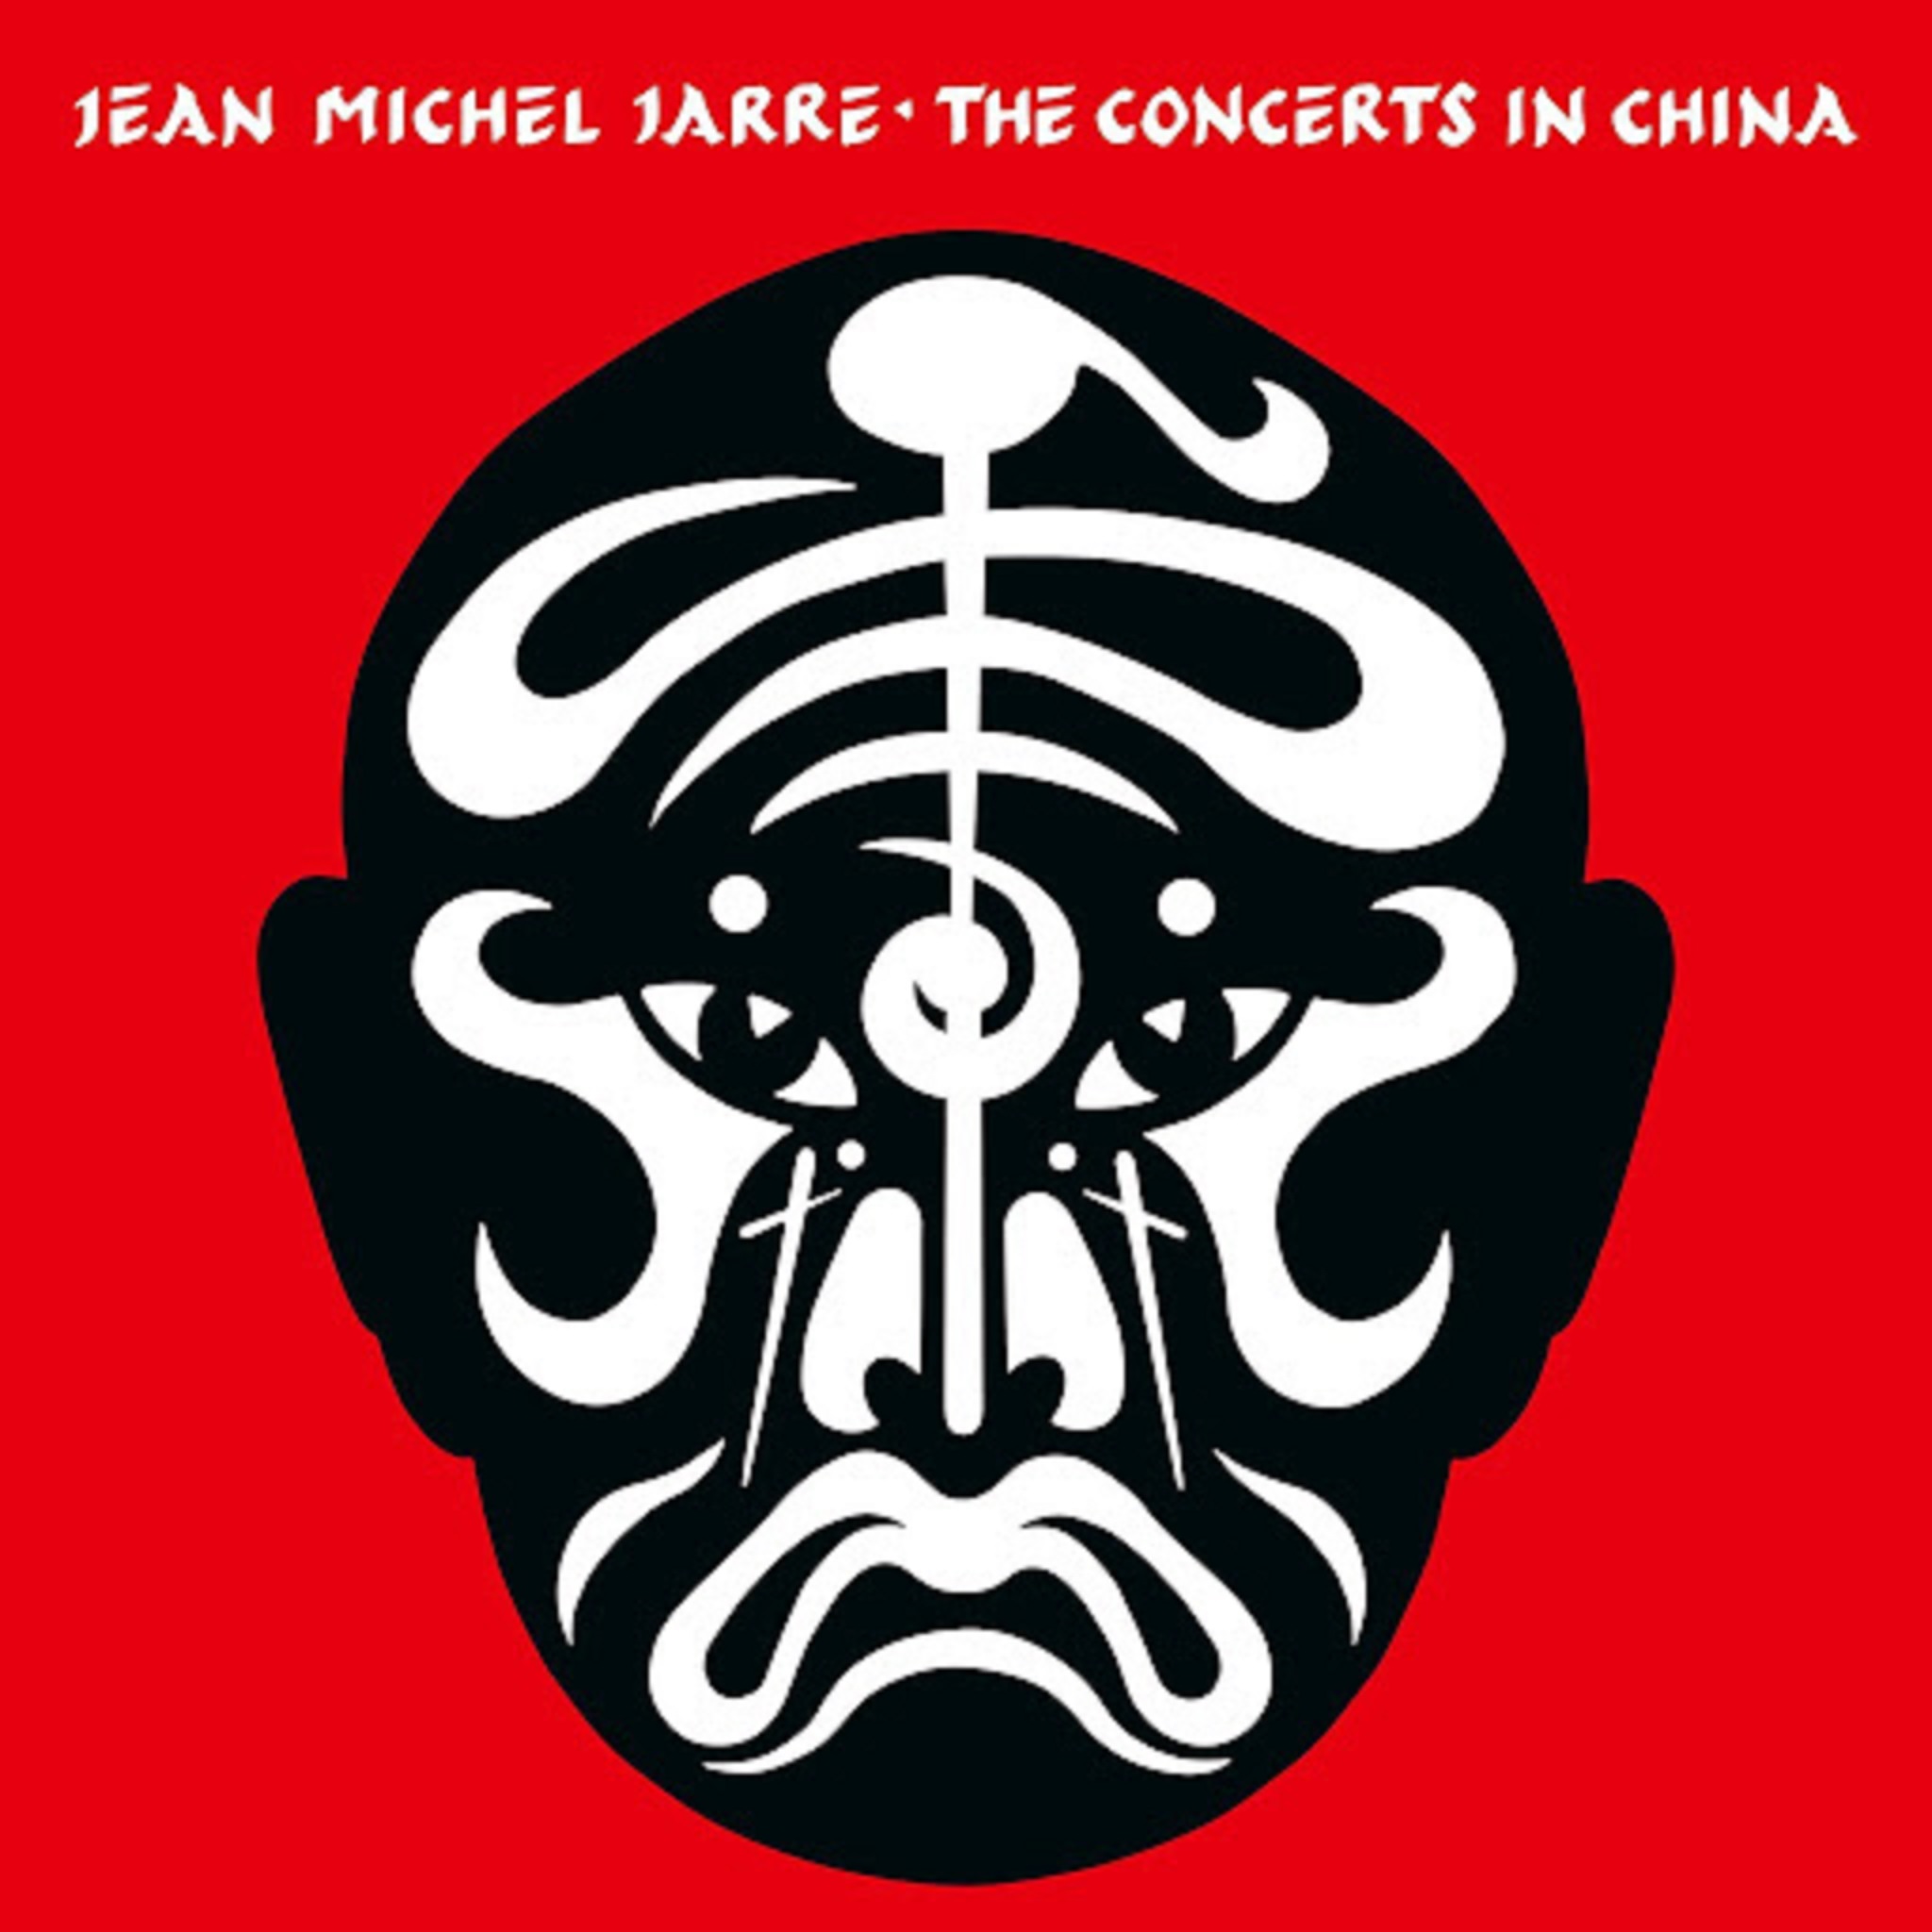 Jean-Michel Jarre, The Concerts in China (40th Anniversary Edition), CD